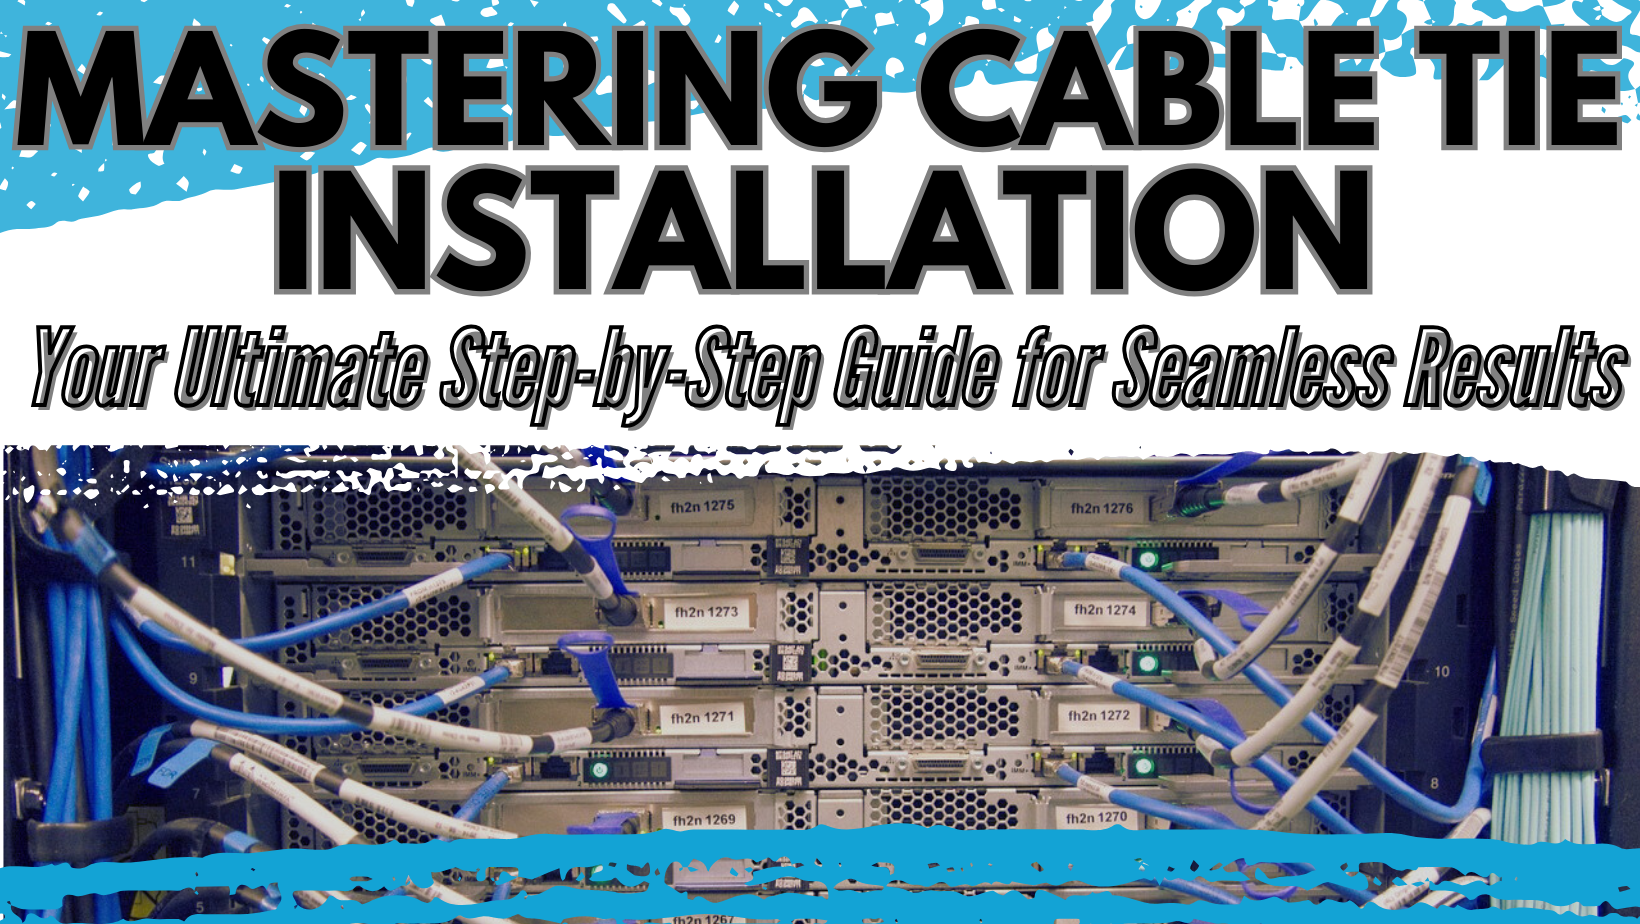 Mastering Cable Tie Installation: Your Ultimate Step-by-Step Guide for Seamless Results